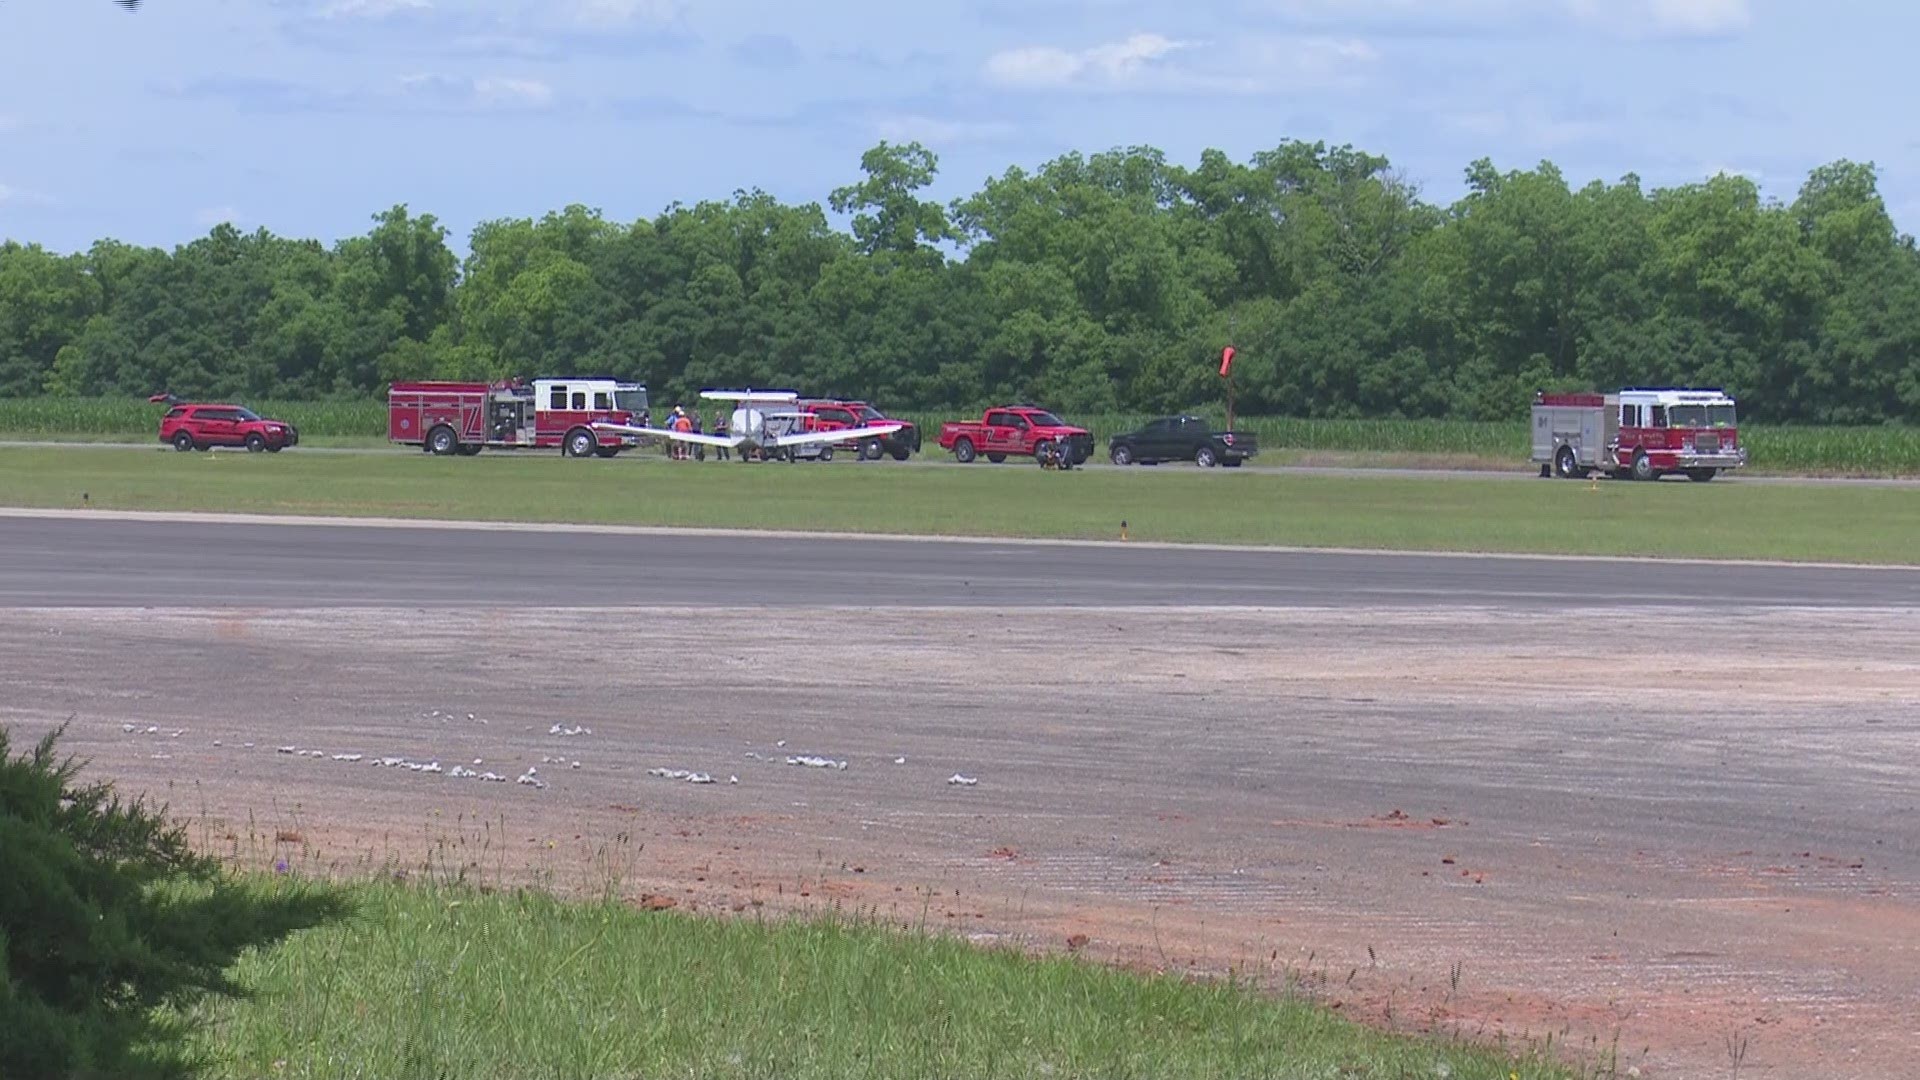 There were two people in the plane, but no one was injured